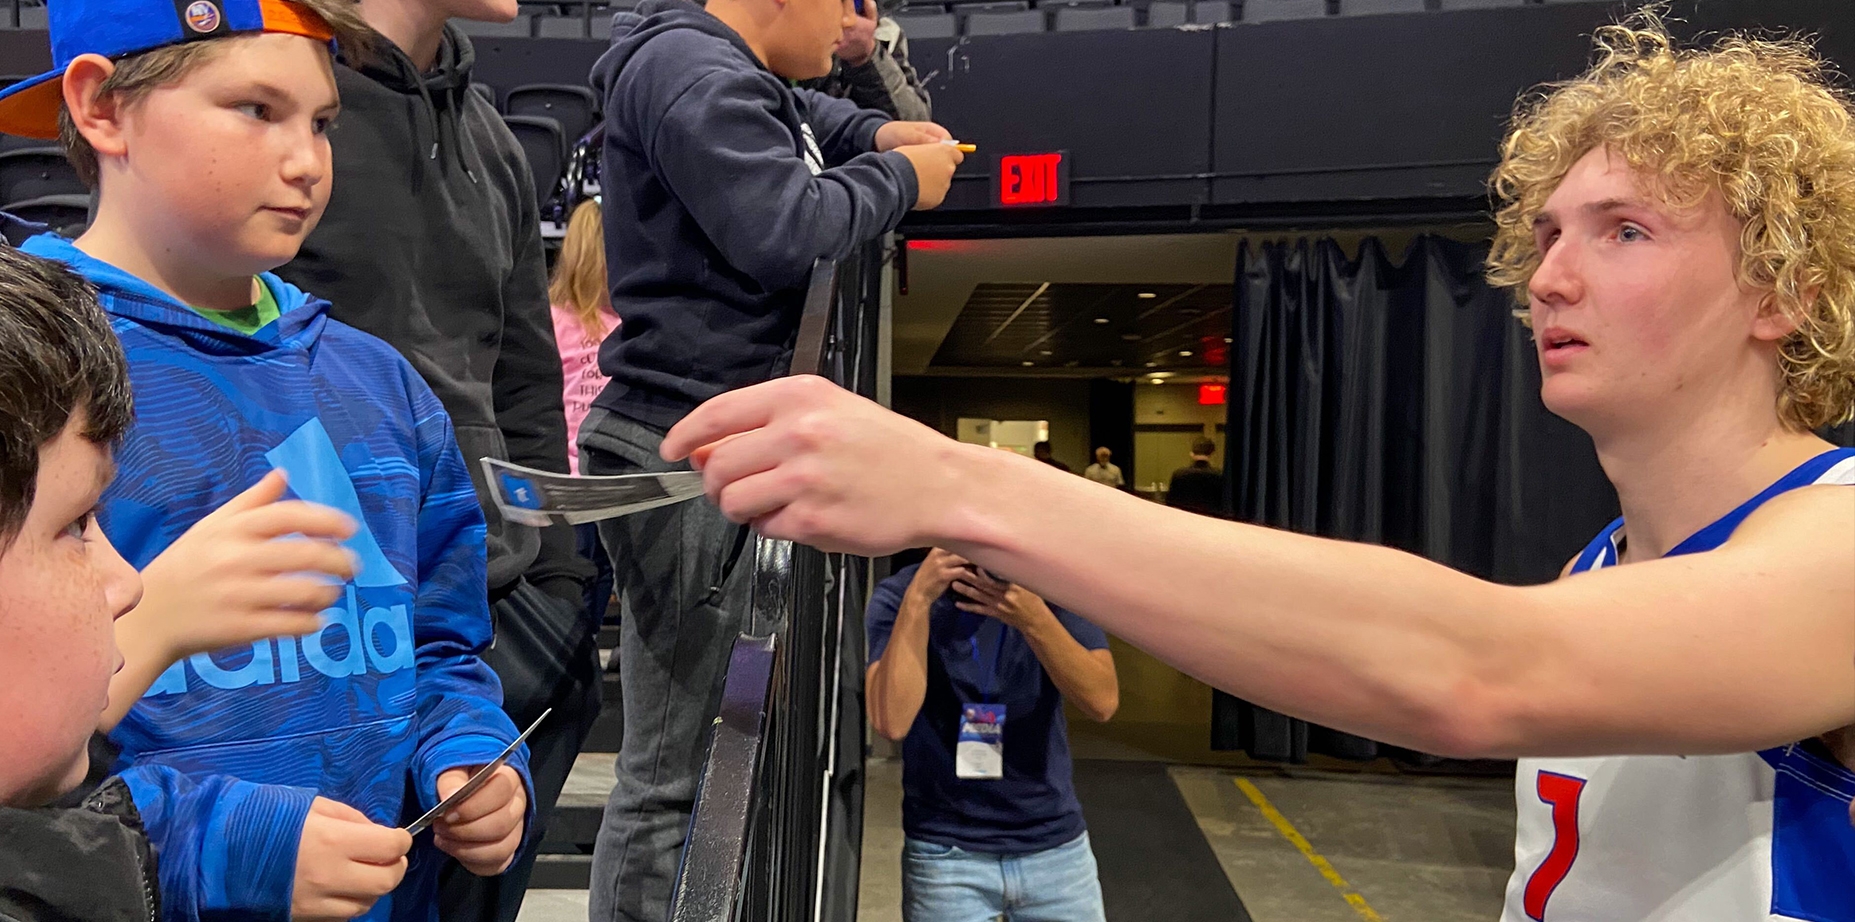 Orthodox NBA G League player Ryan Turell signs autographs for Jewish fans after the at the Nassau Coliseum in Uniondale, New York on Tuesday, March 8, 2023. (Jacob Henry)